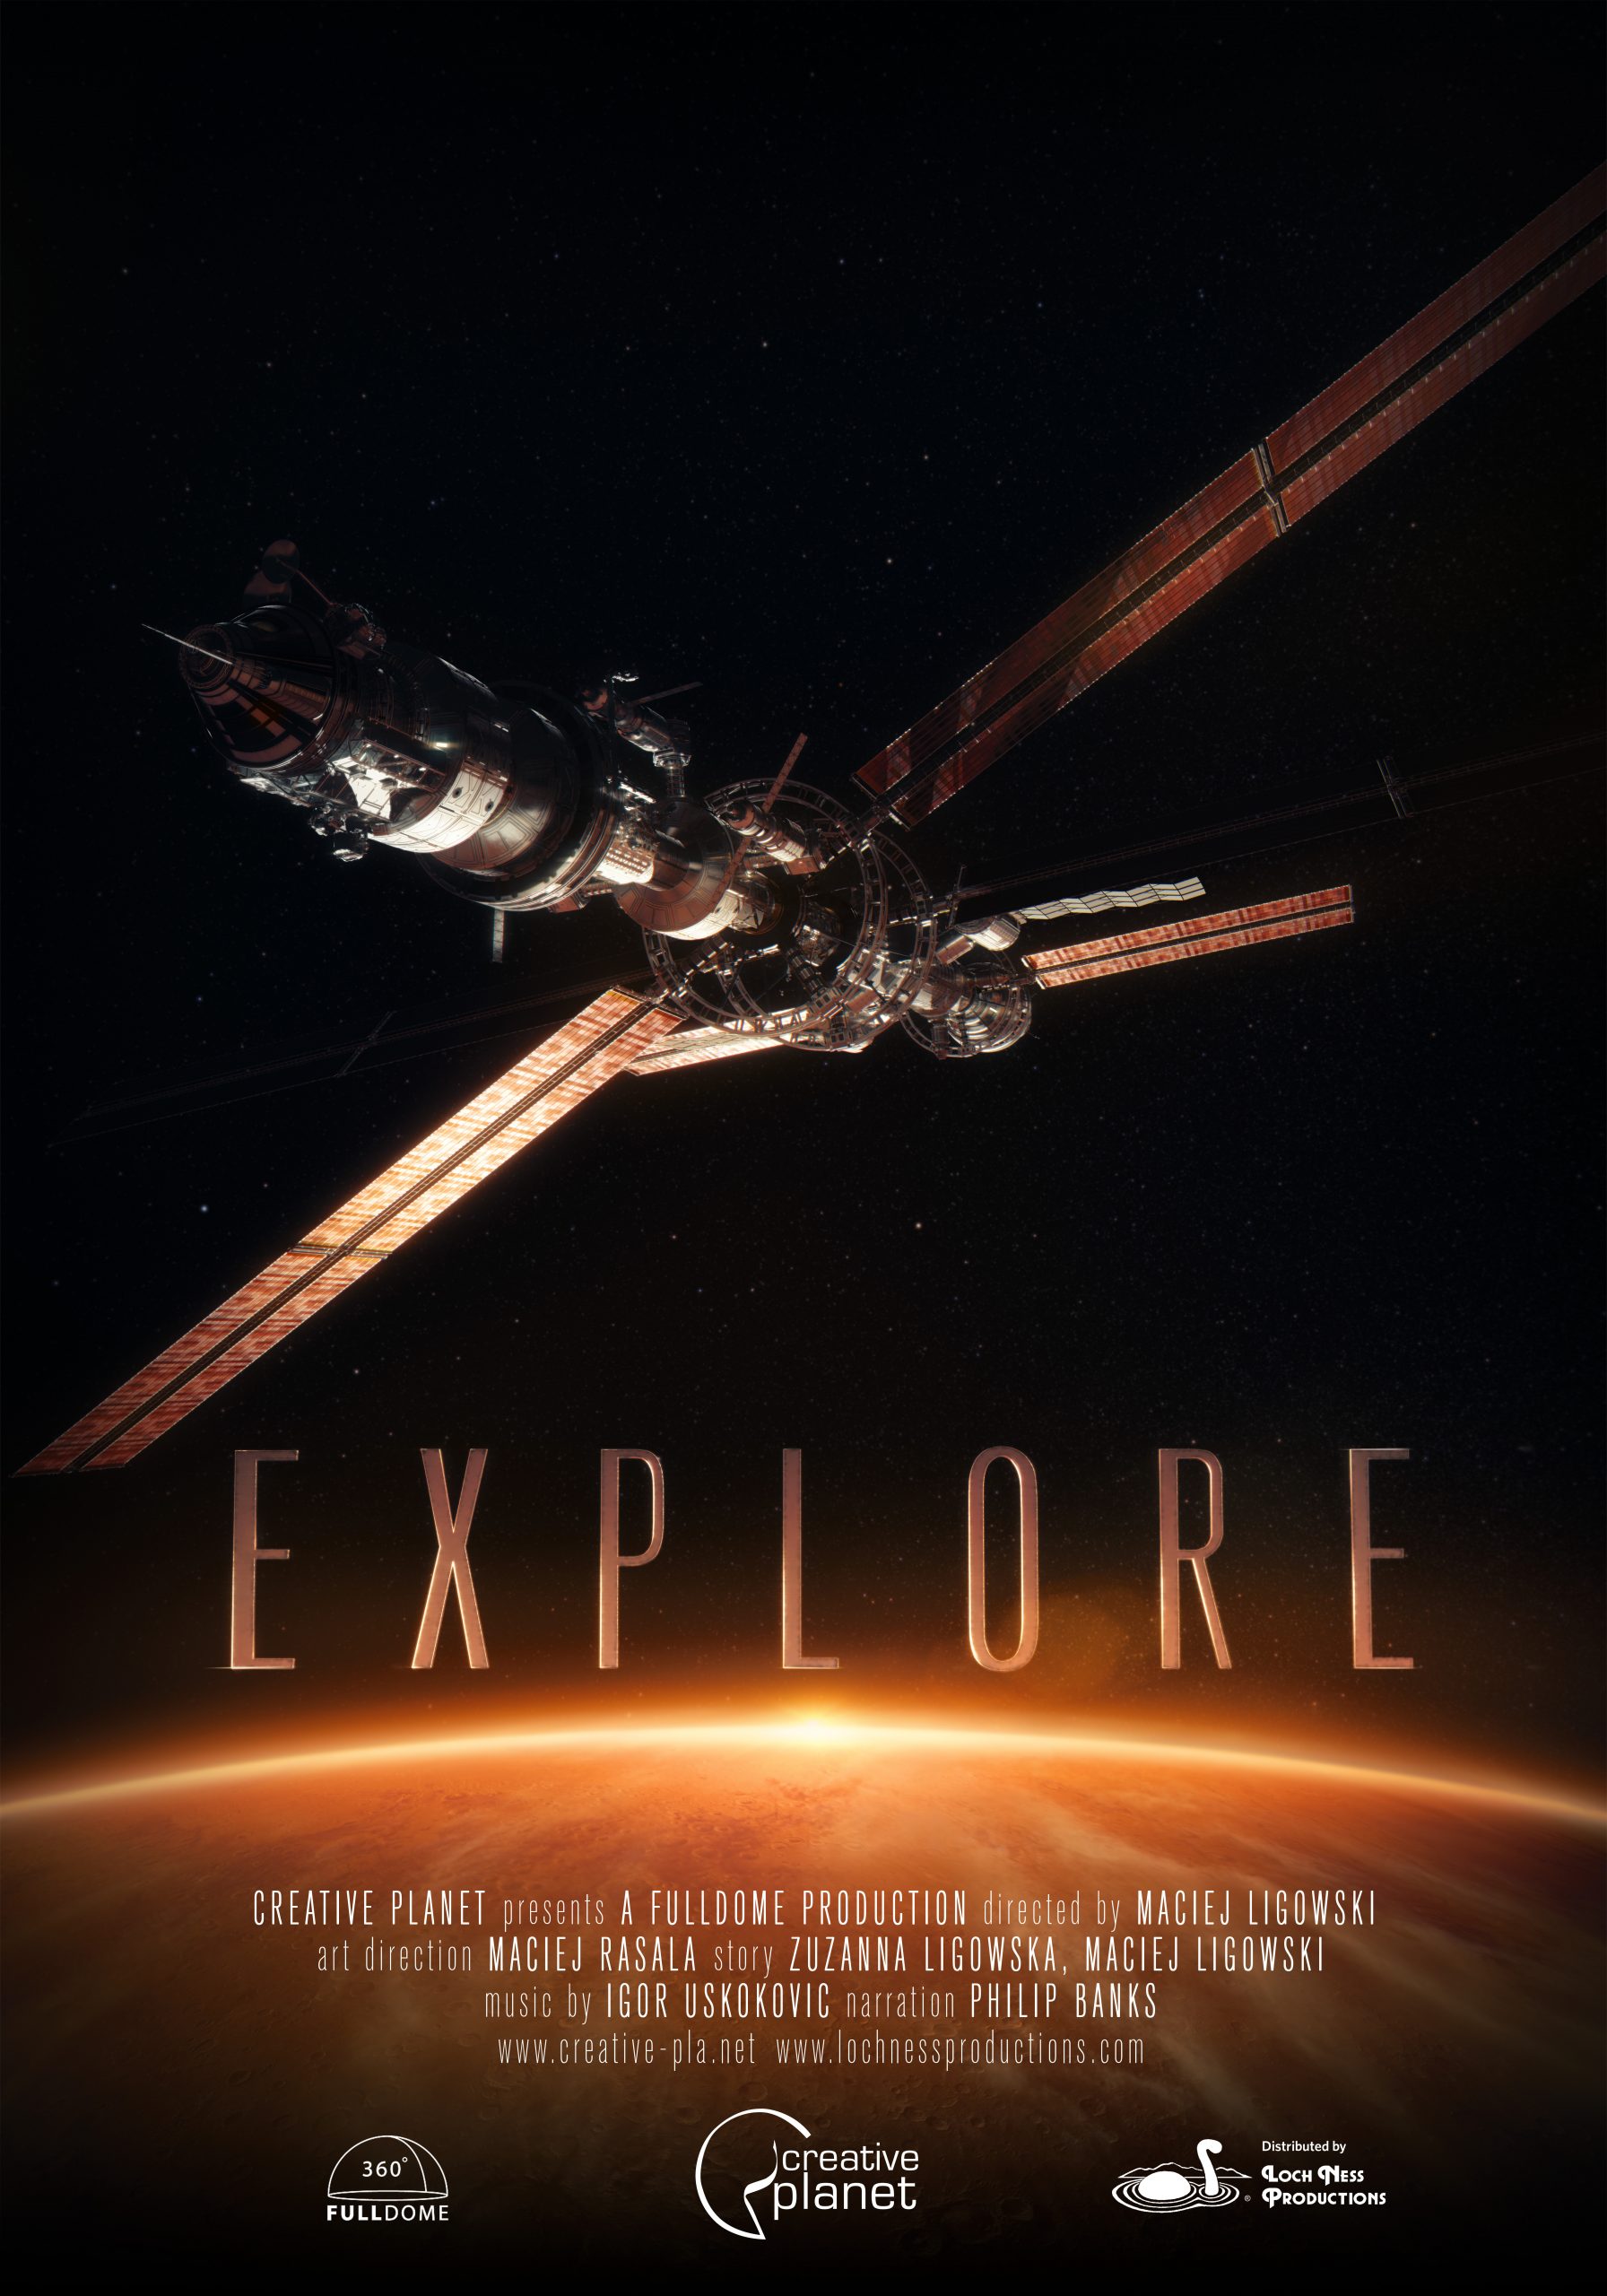 An illustration of a satellite, above a lighted horizon serves as the cinematic promotional poster for the film Explore